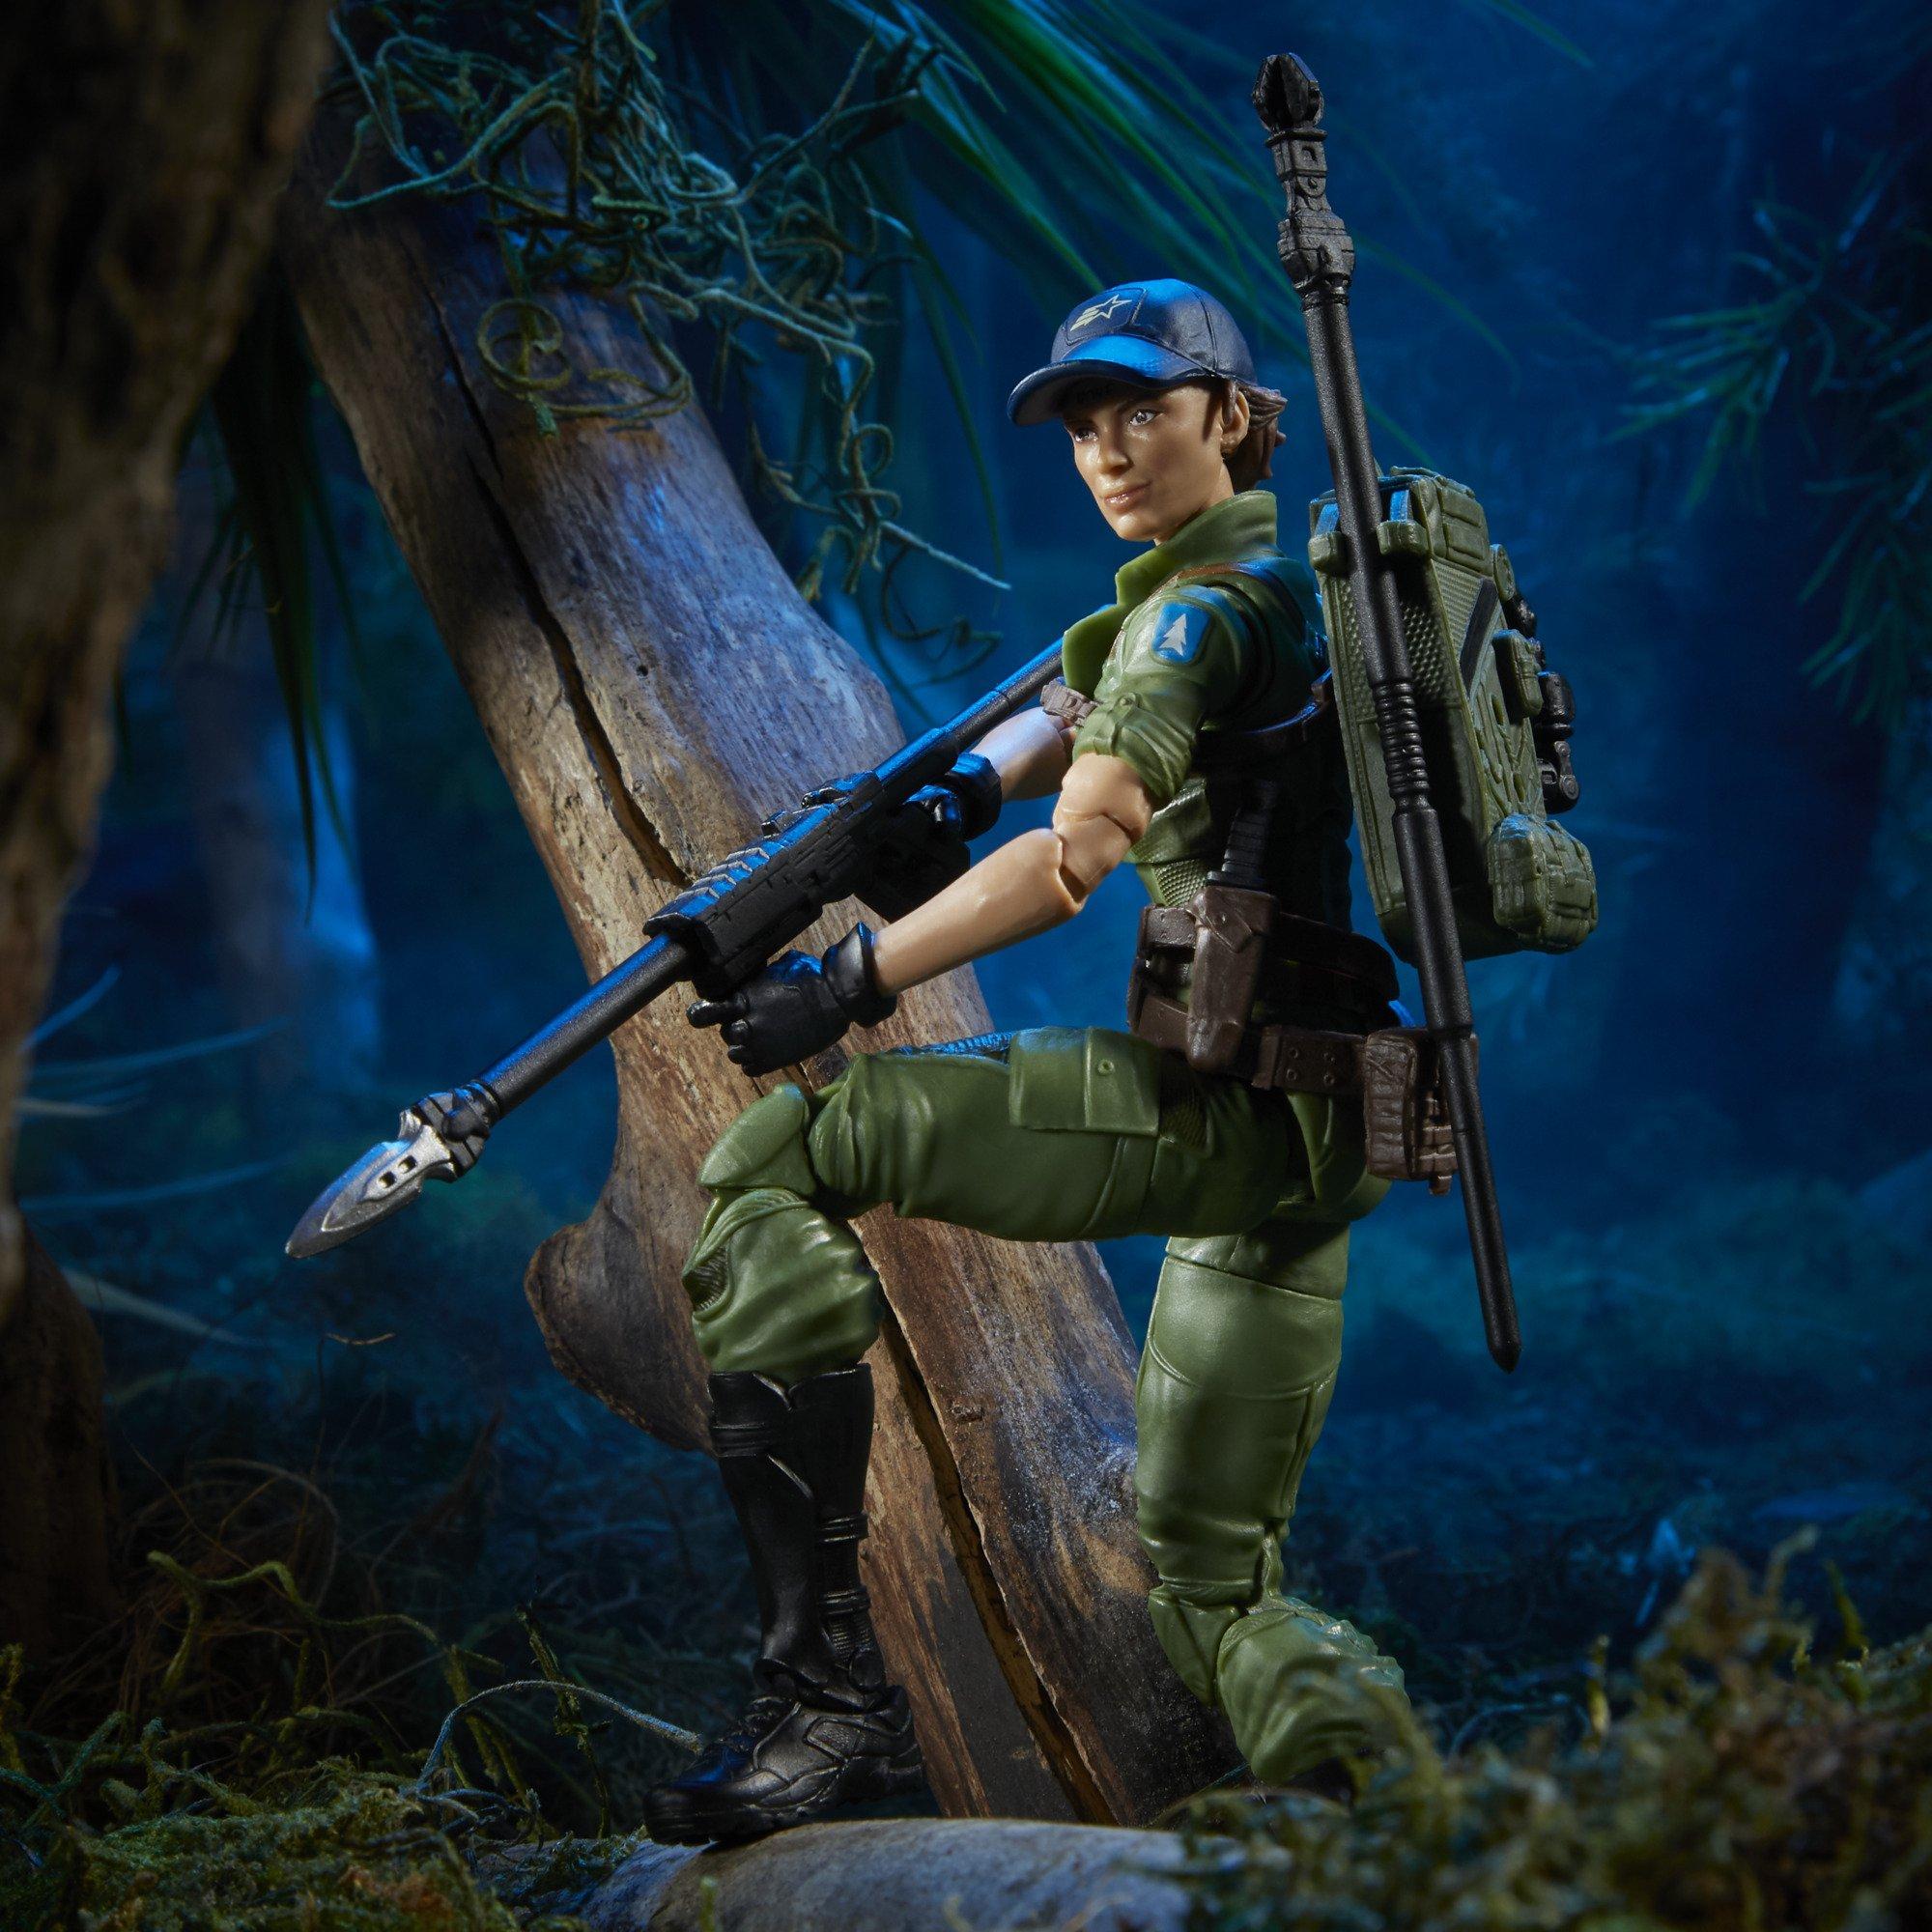 Hasbro G.I Joe Classified Series Lady Jaye Action Figure 25 Collectible Premium Toy with Multiple Accessories 6-Inch Scale with Custom Package Art 